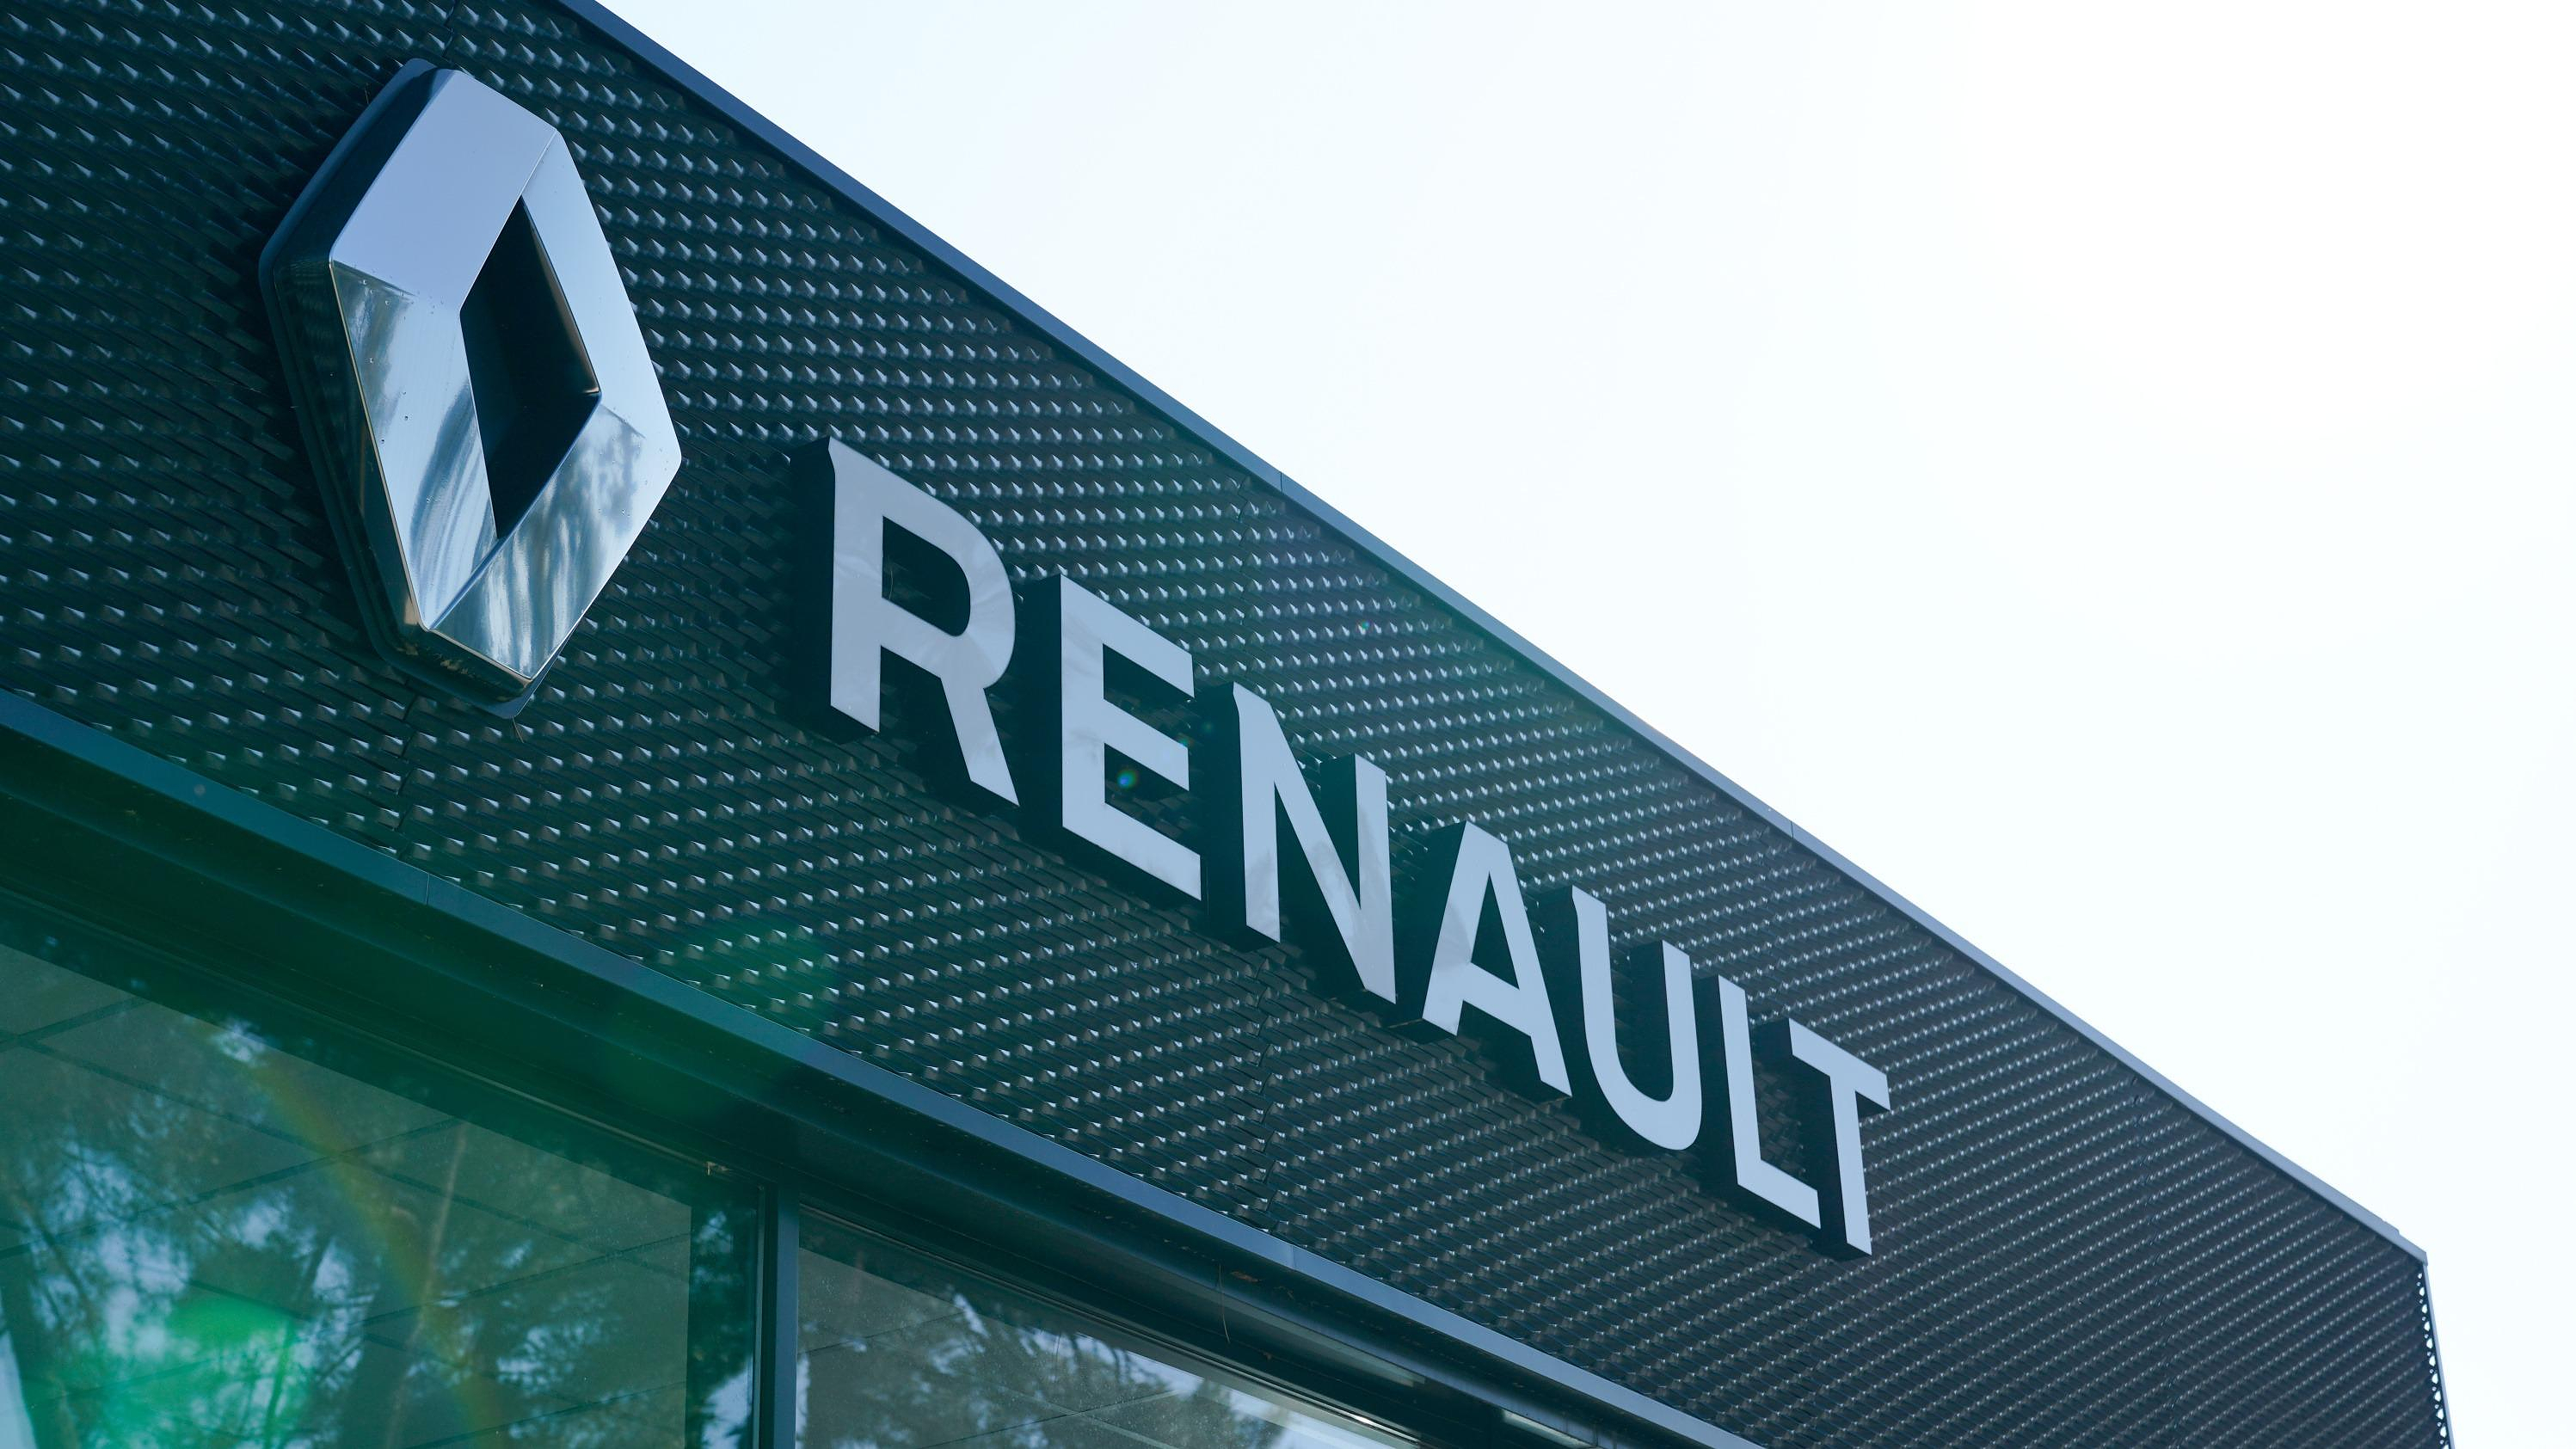 After three years of implementing the recovery plan, Renault in great shape